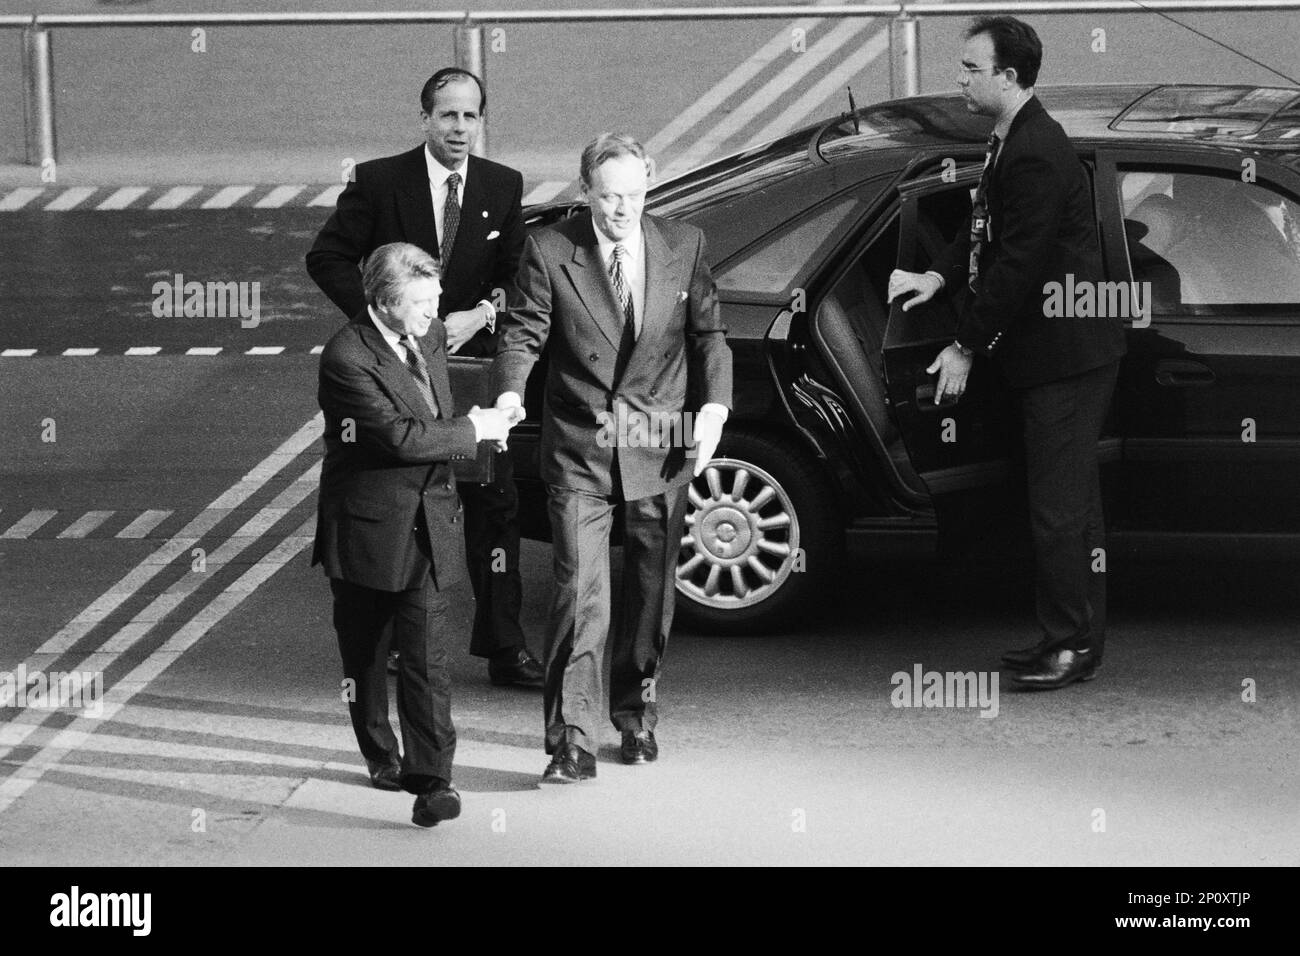 Archives 90ies: G7 summit, Arrival of the Heads of States, Jean Chrétien, canadian prime minister, Lyon, France, 1996 Stock Photo